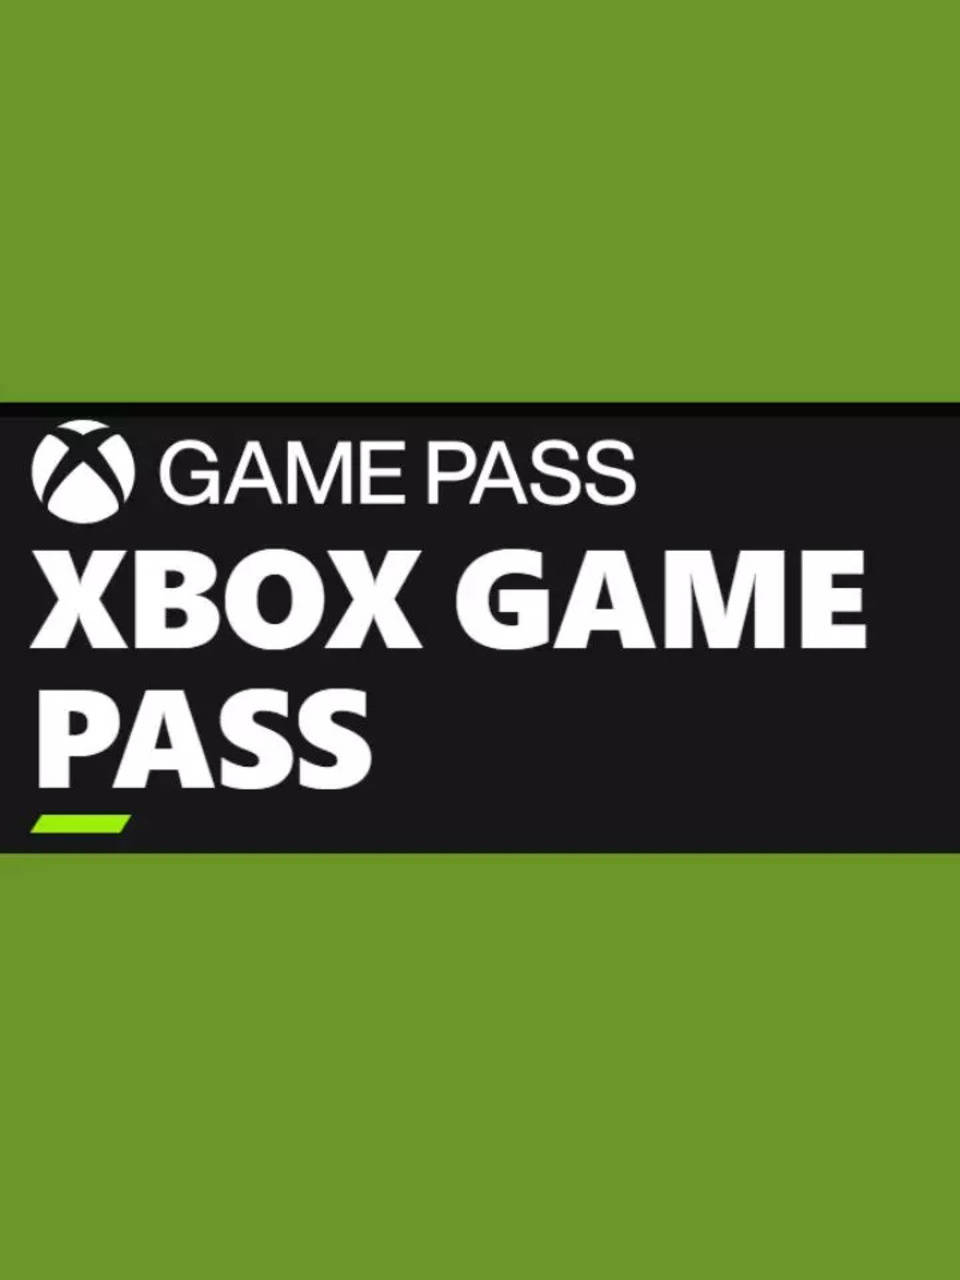 Cities: Skylines 2 Is Available Today With Xbox Game Pass (October